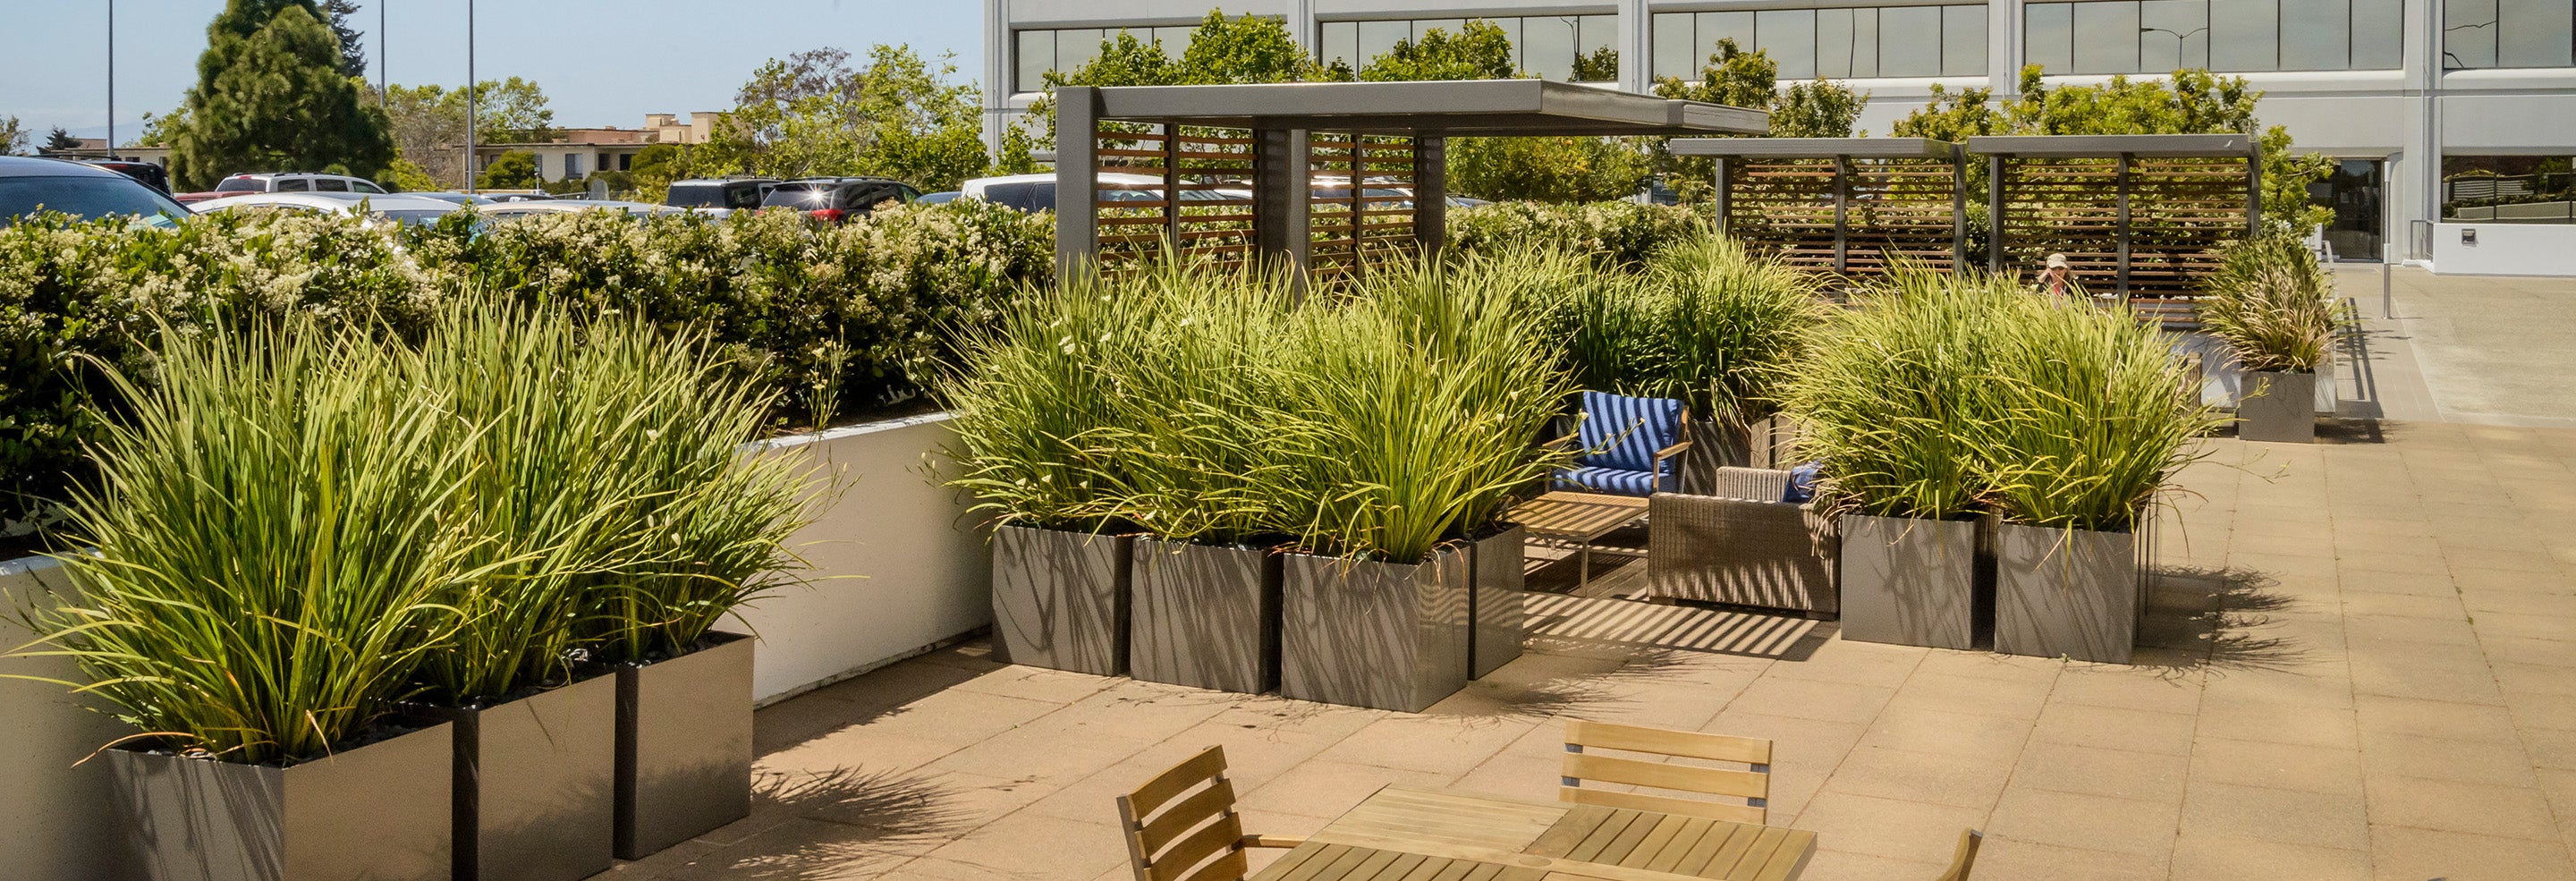 PureModern Large Custom Planters at The Towers in Emeryville CA